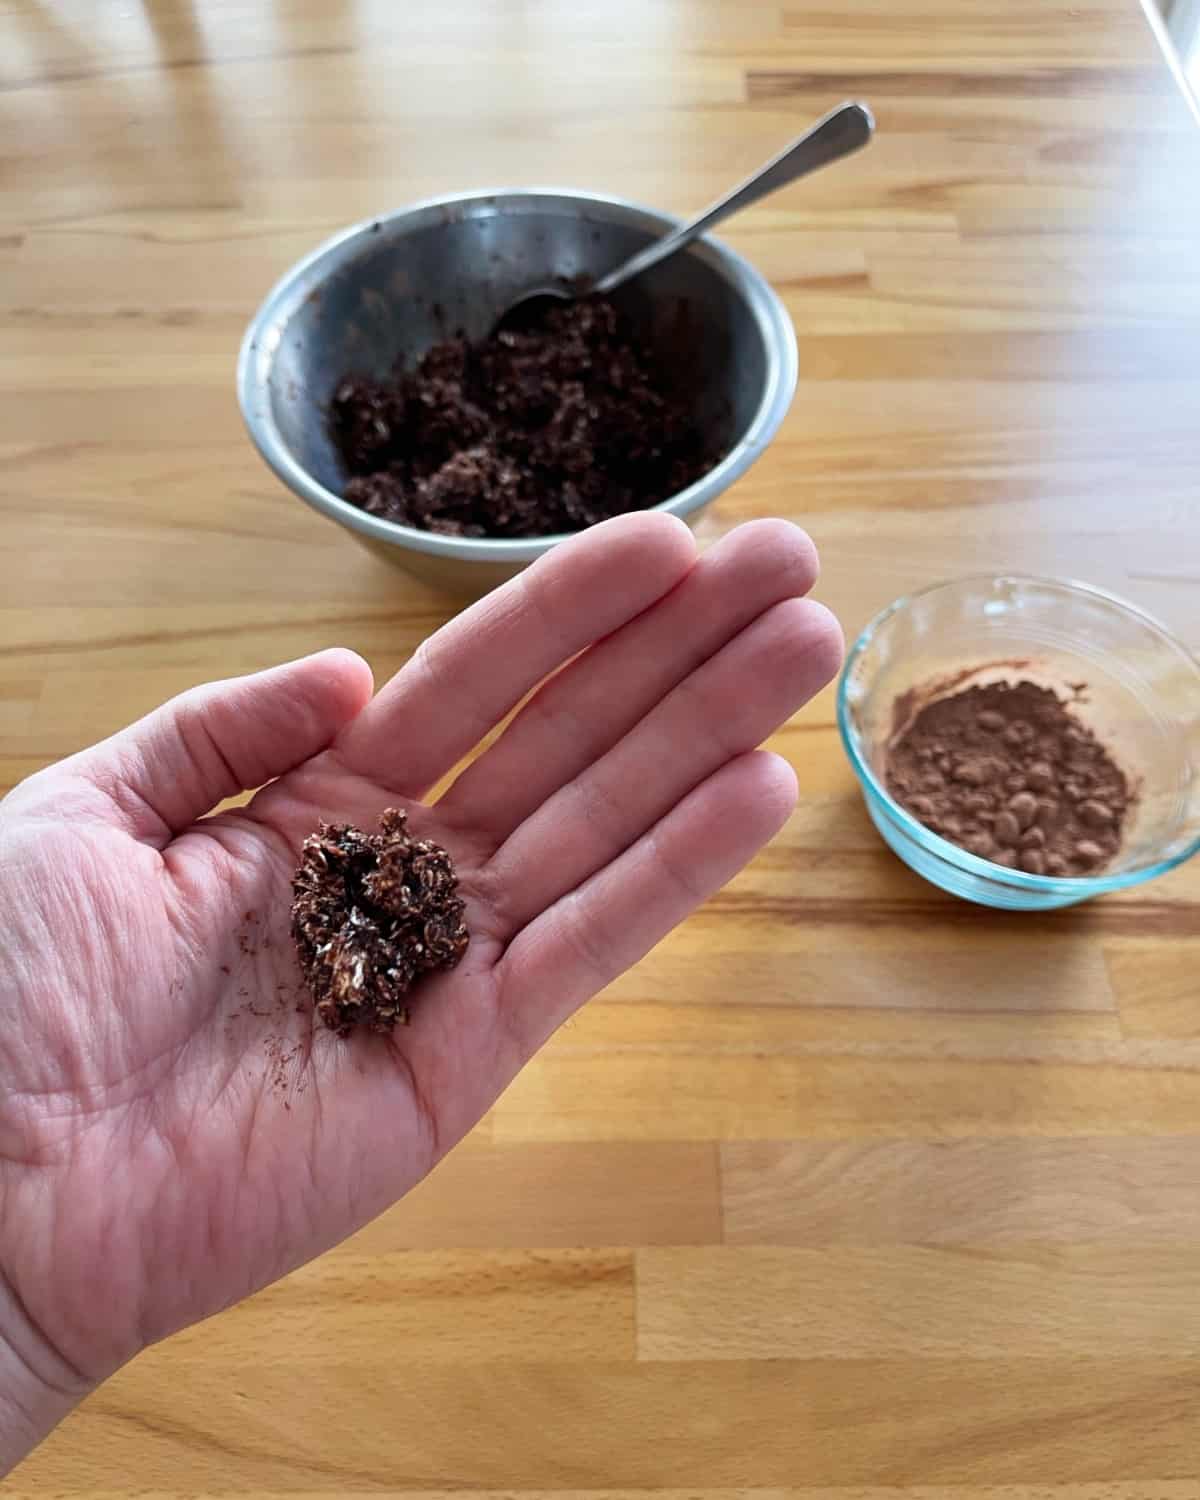 Rolling cranberry chocolate truffles in palm of hand.